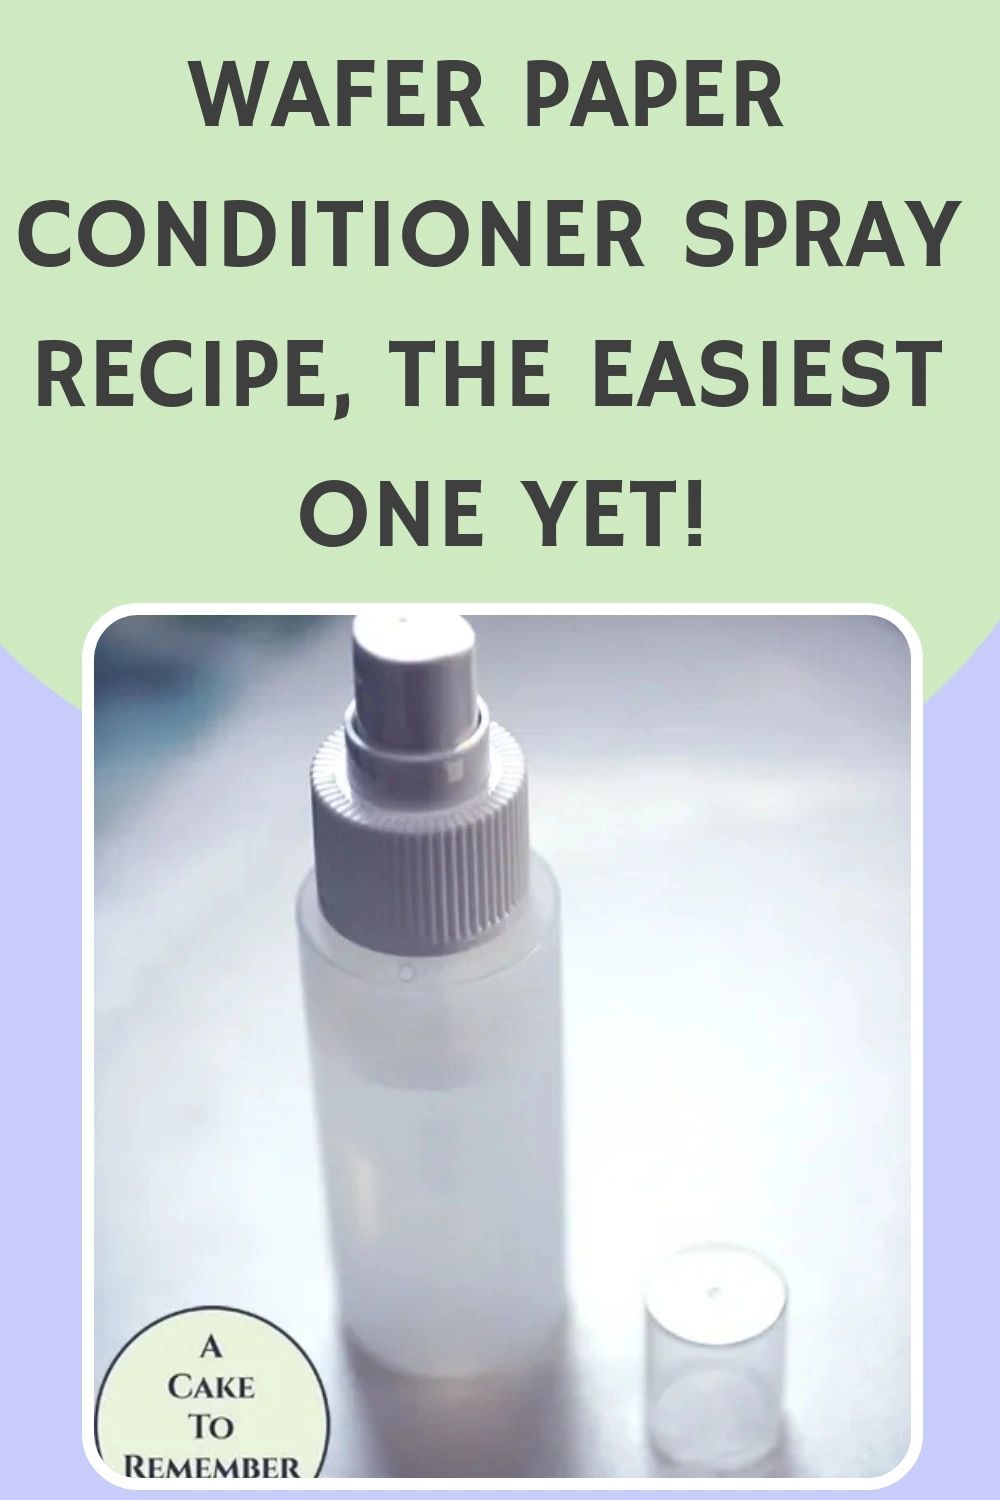 Wafer Paper Conditioner Spray Recipe, The Easiest One Yet!